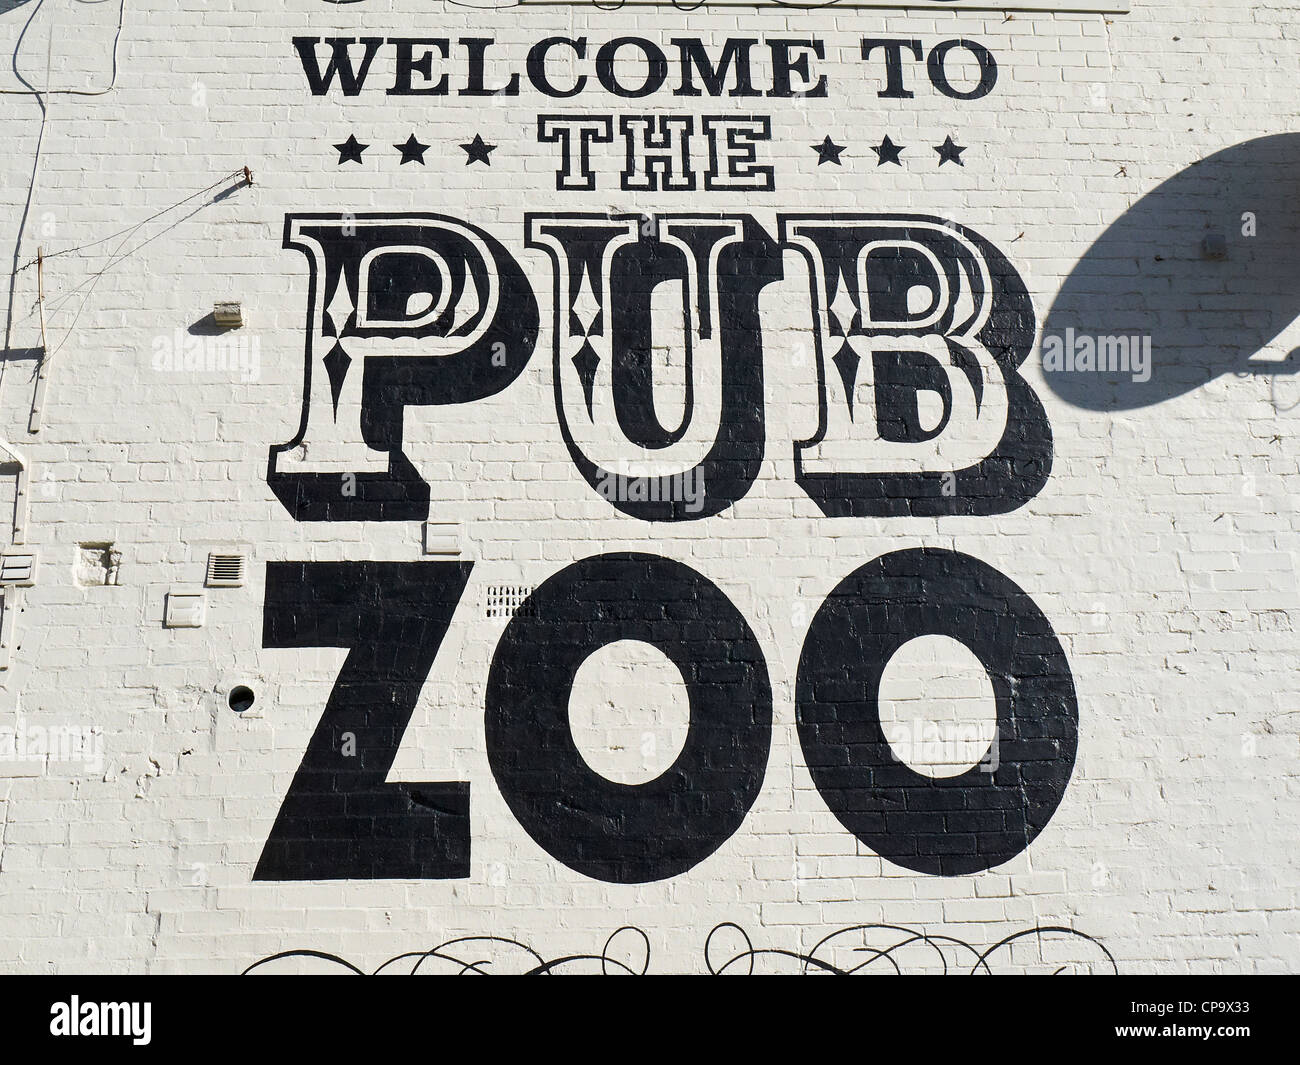 Welcome to the Pub Zoo writing on wall in Manchester UK Stock Photo